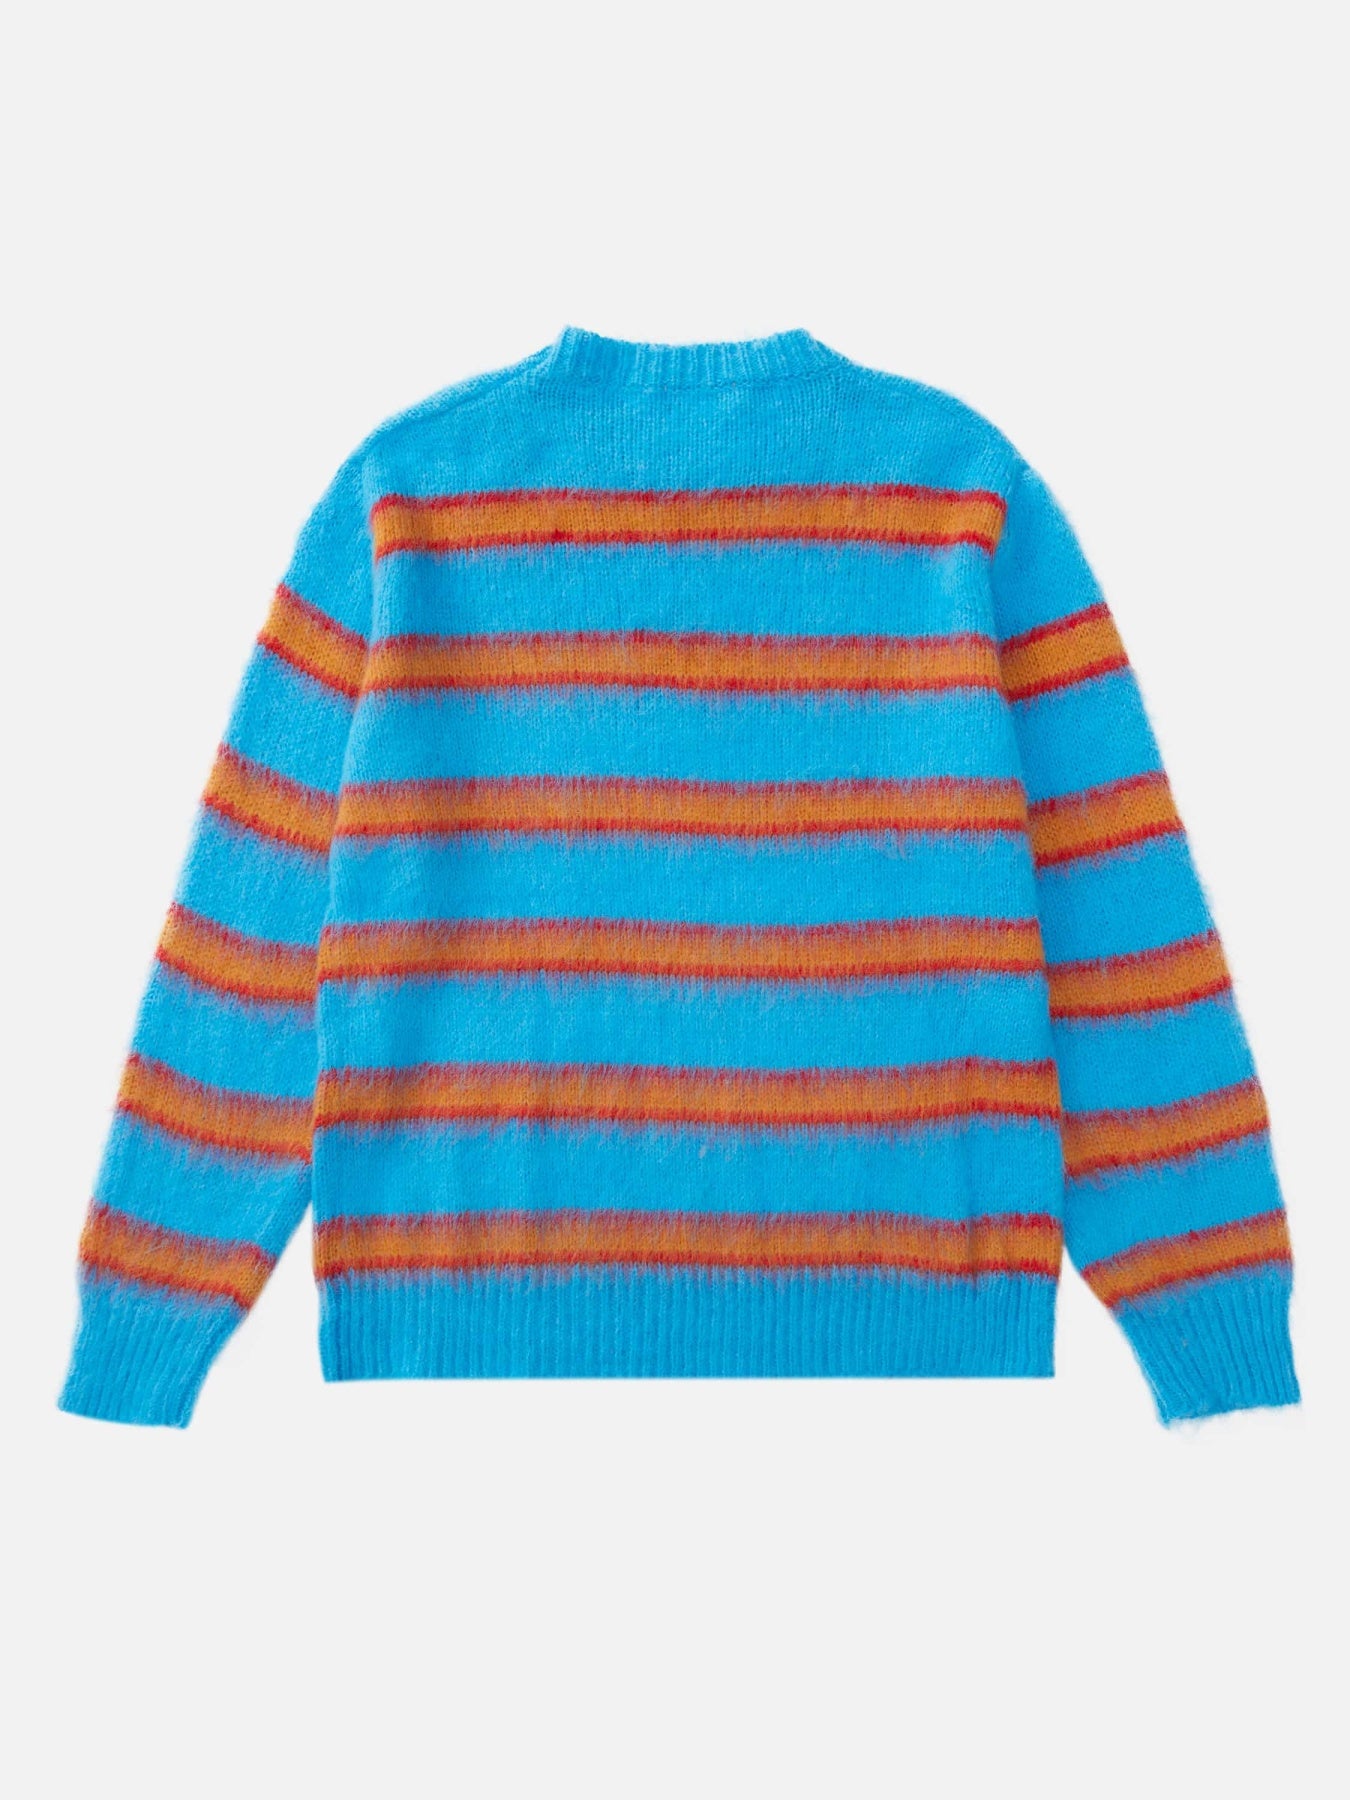 The Supermade Color Contrast Striped Sweater